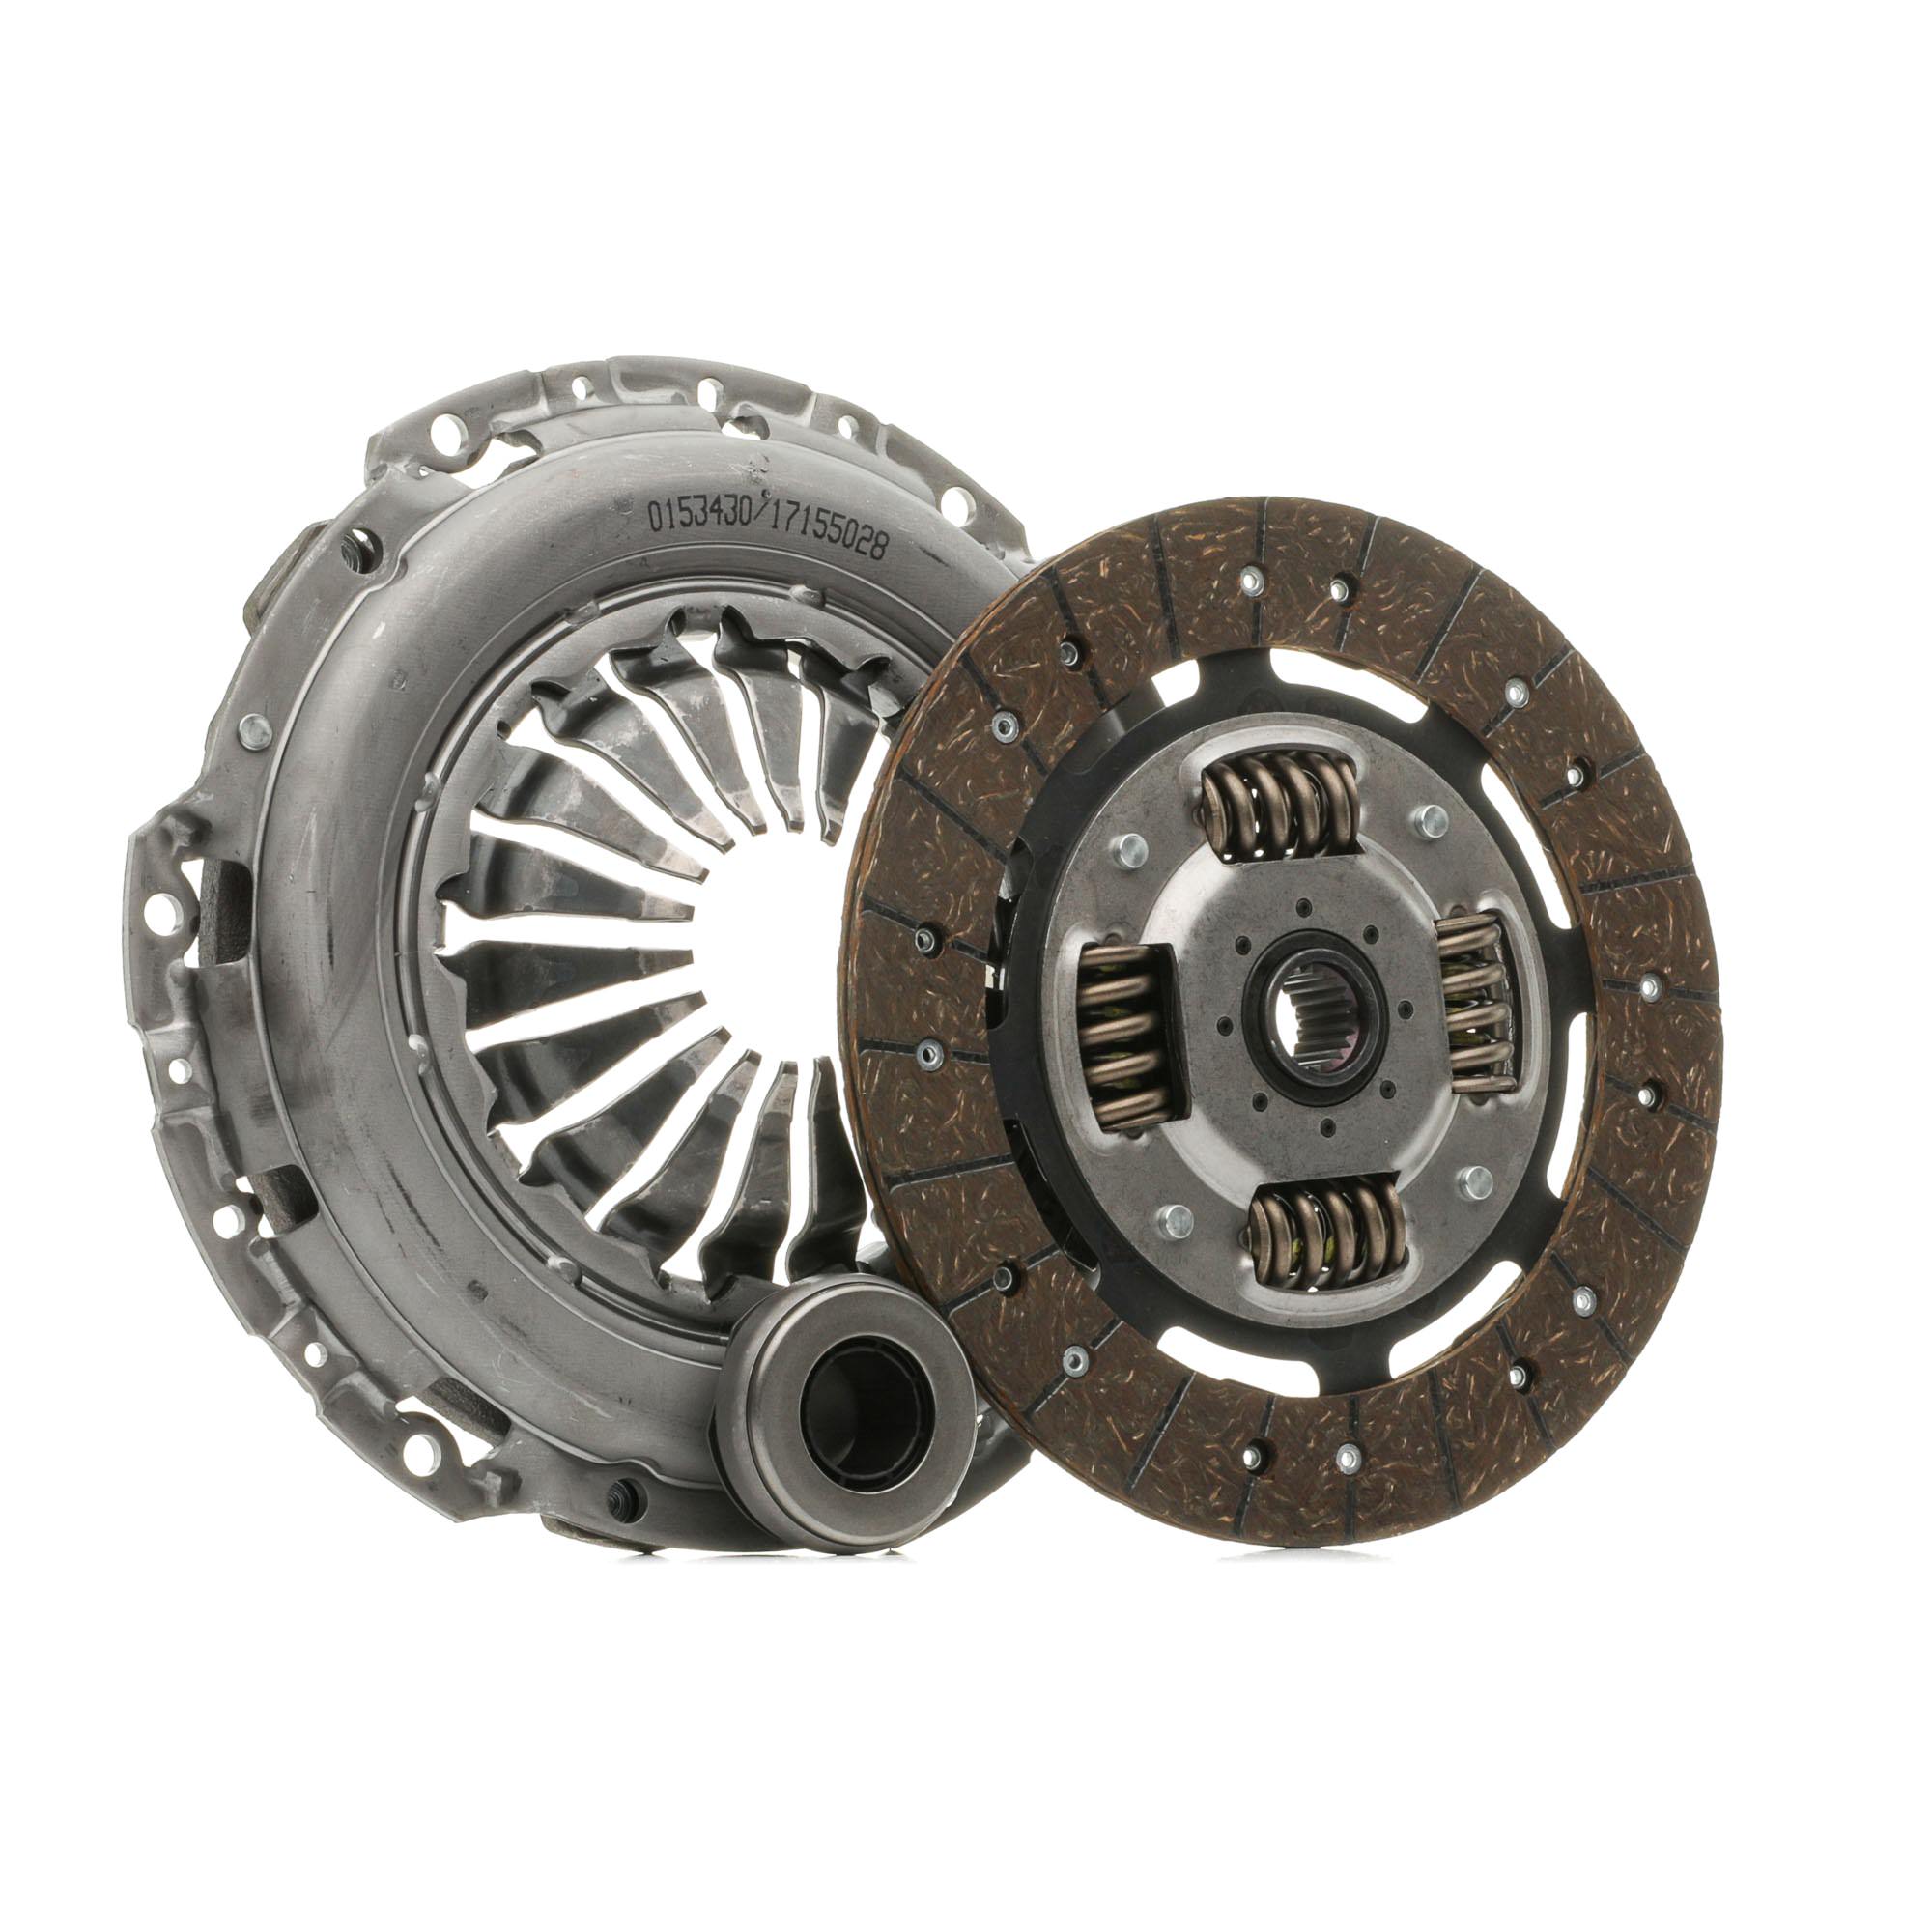 SKCK-0101797 STARK Clutch set CITROËN with clutch pressure plate, with clutch release bearing, with clutch disc, 240mm